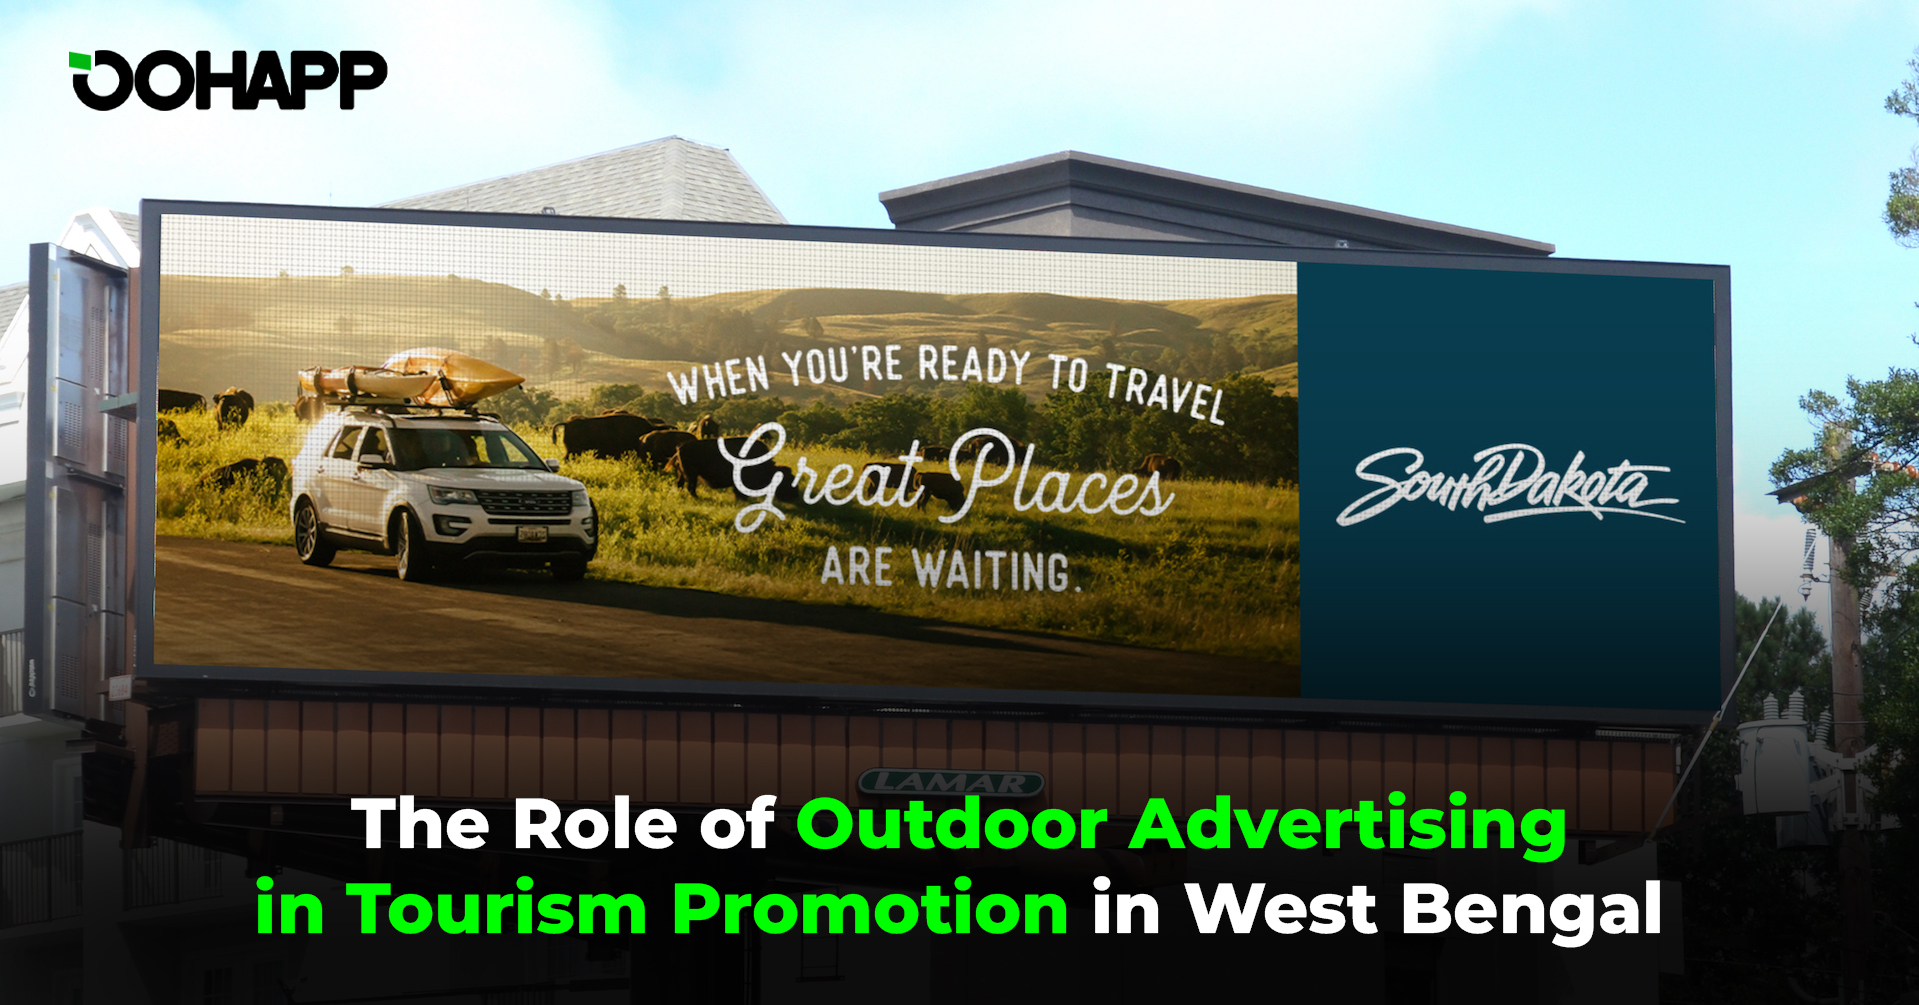 The Role of Outdoor Advertising in Tourism Promotion in West Bengal